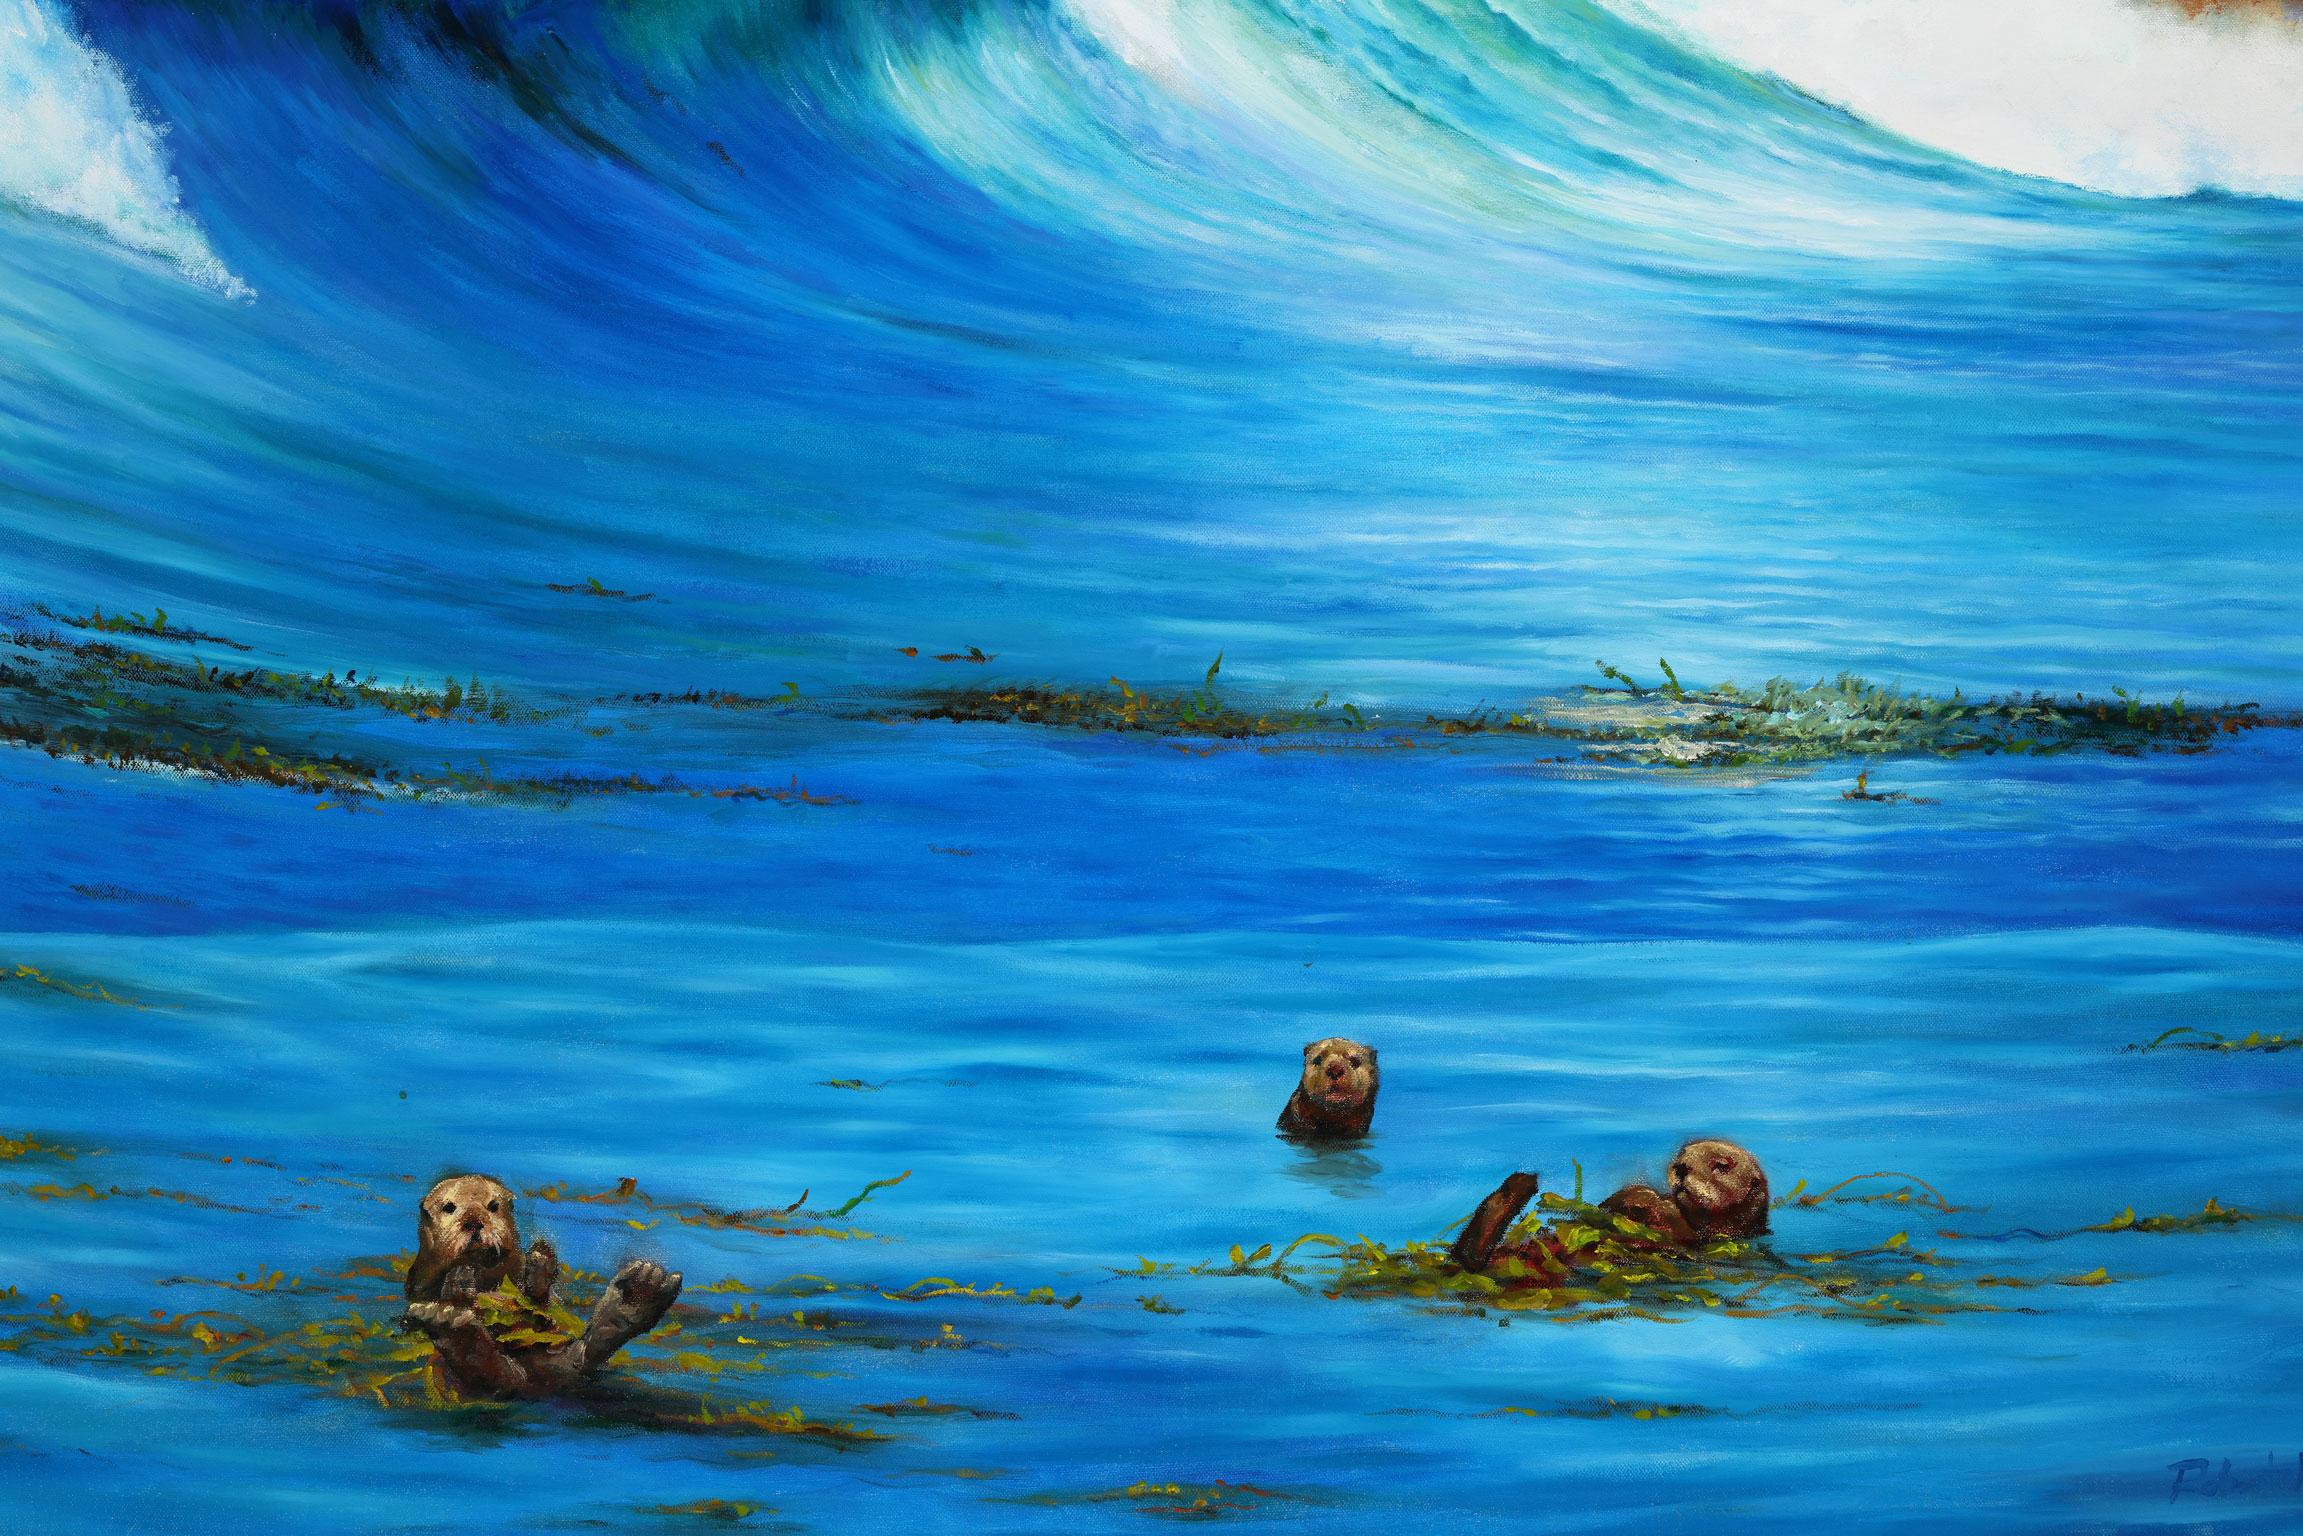 “Otter Cove,” an original oil on canvas by Robert K. White, is a piece for the true collector. White’s careful attention to detail and vivid use of blues, whites, browns, and greens project from the painting, immediately capturing the viewer's